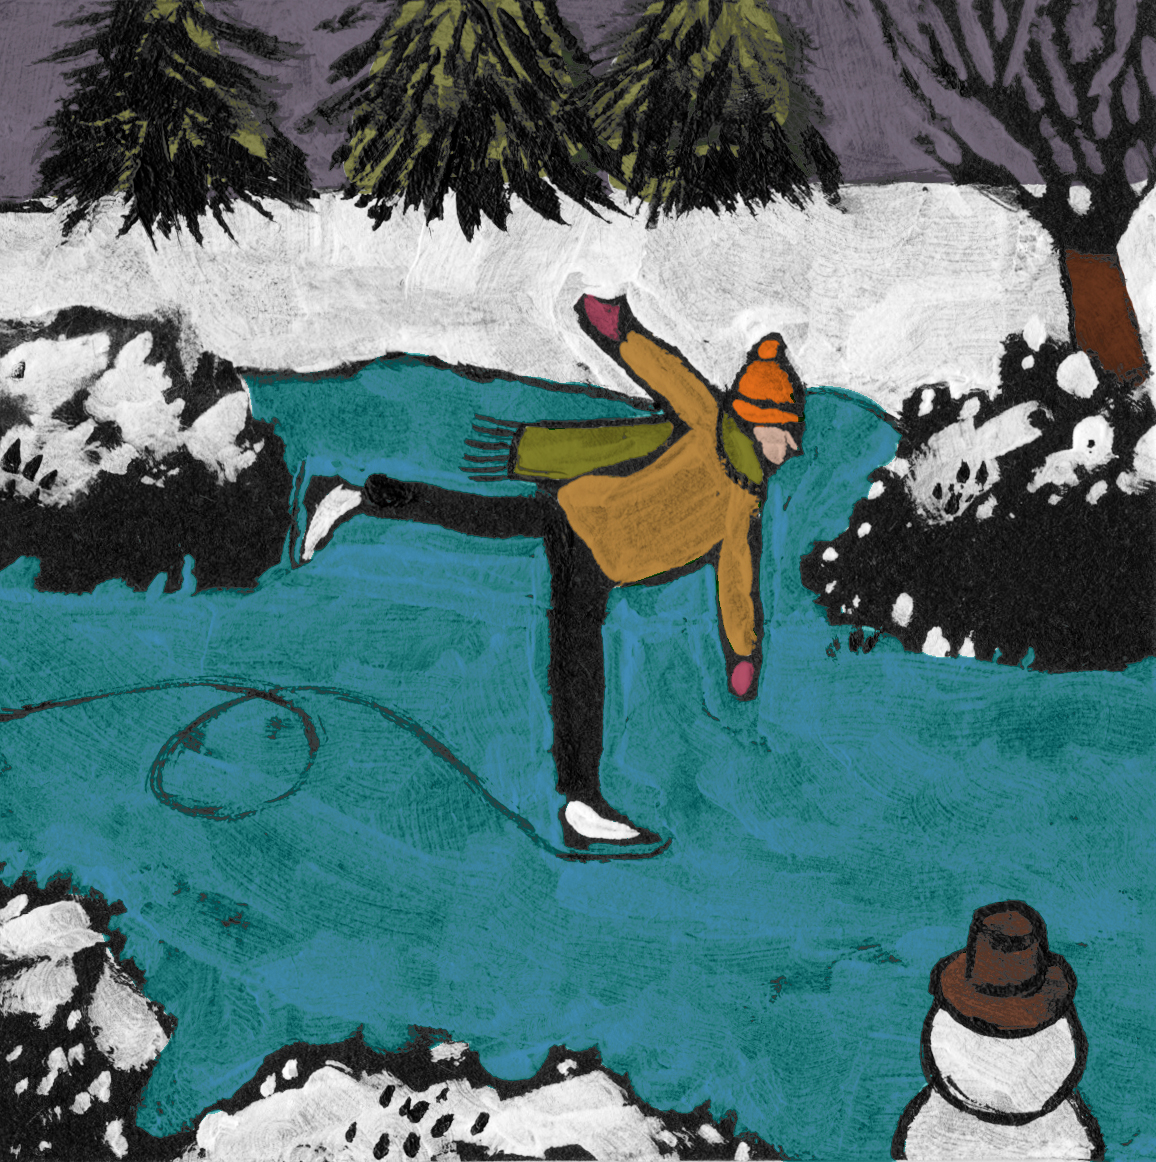 Hand-painted illustration of a boy ice skating 